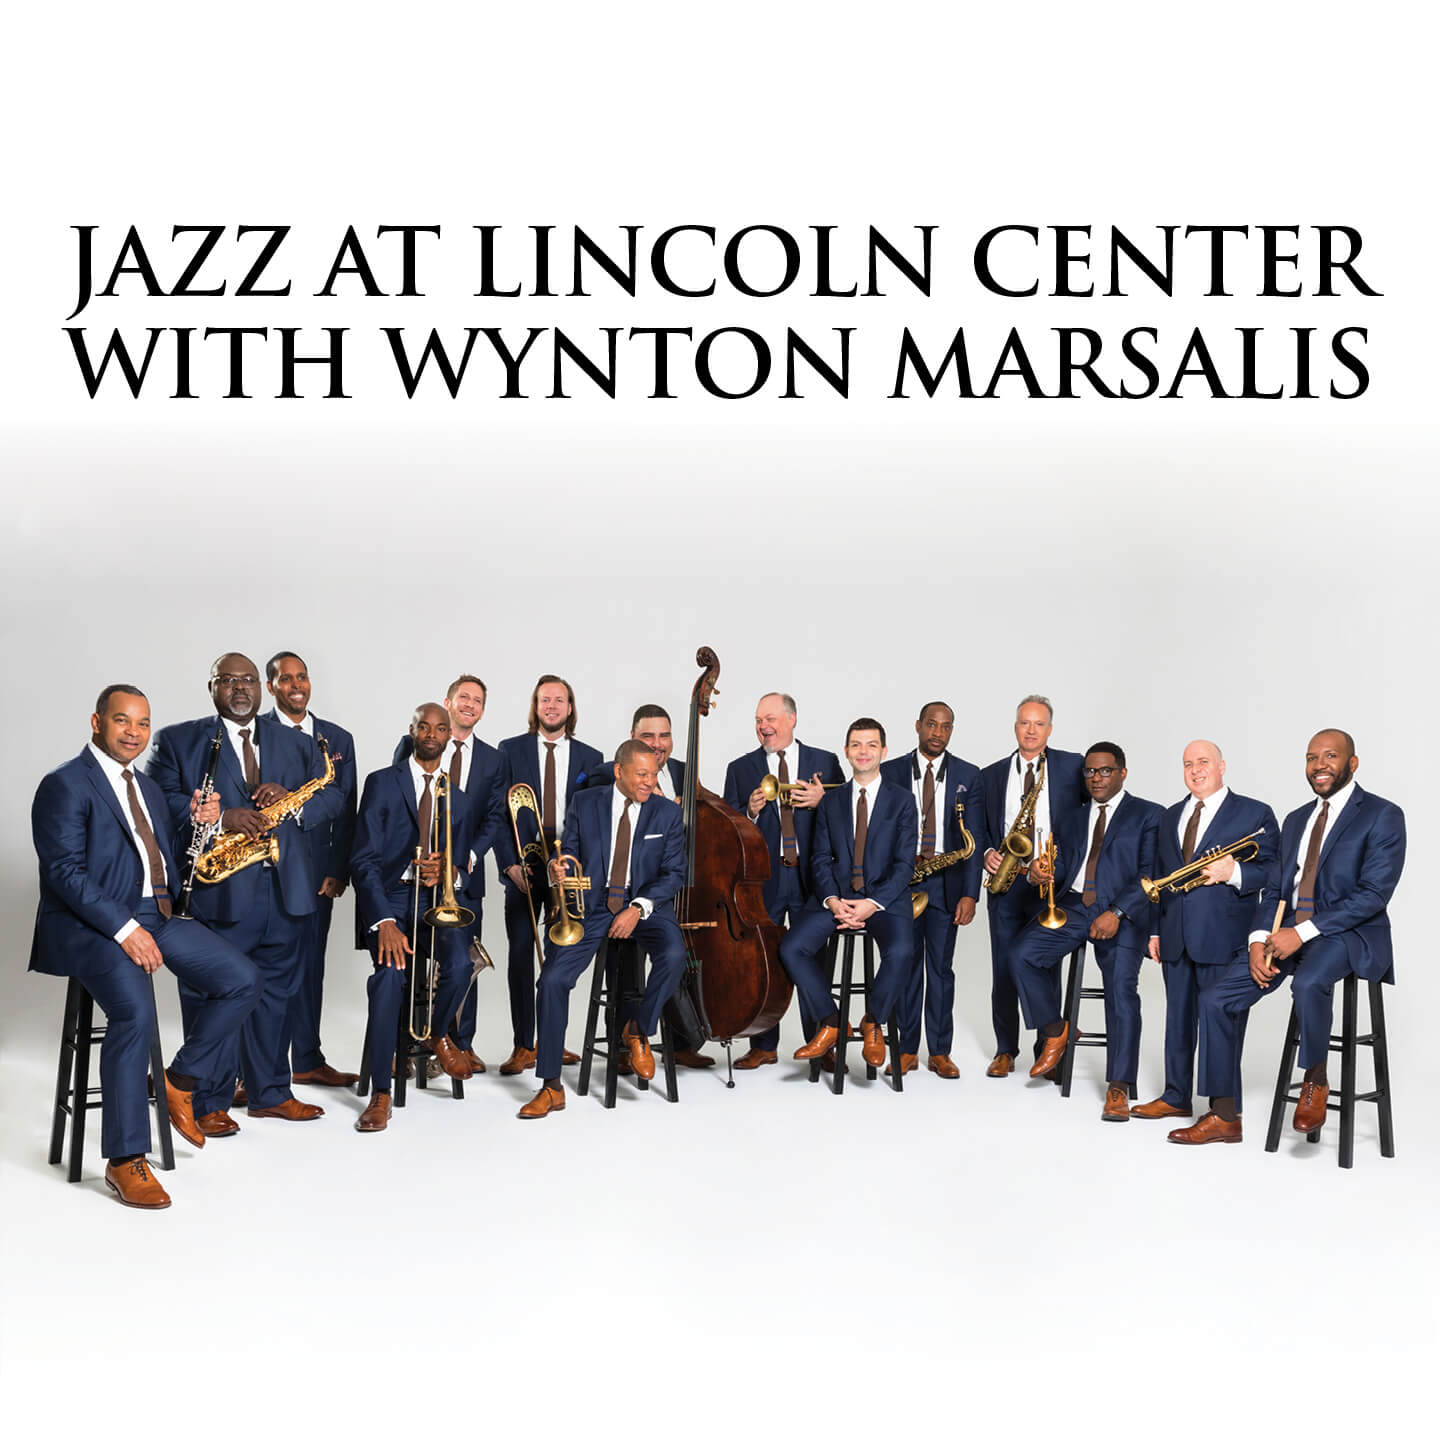 Jazz at Lincoln Center with Wynton Marsalis